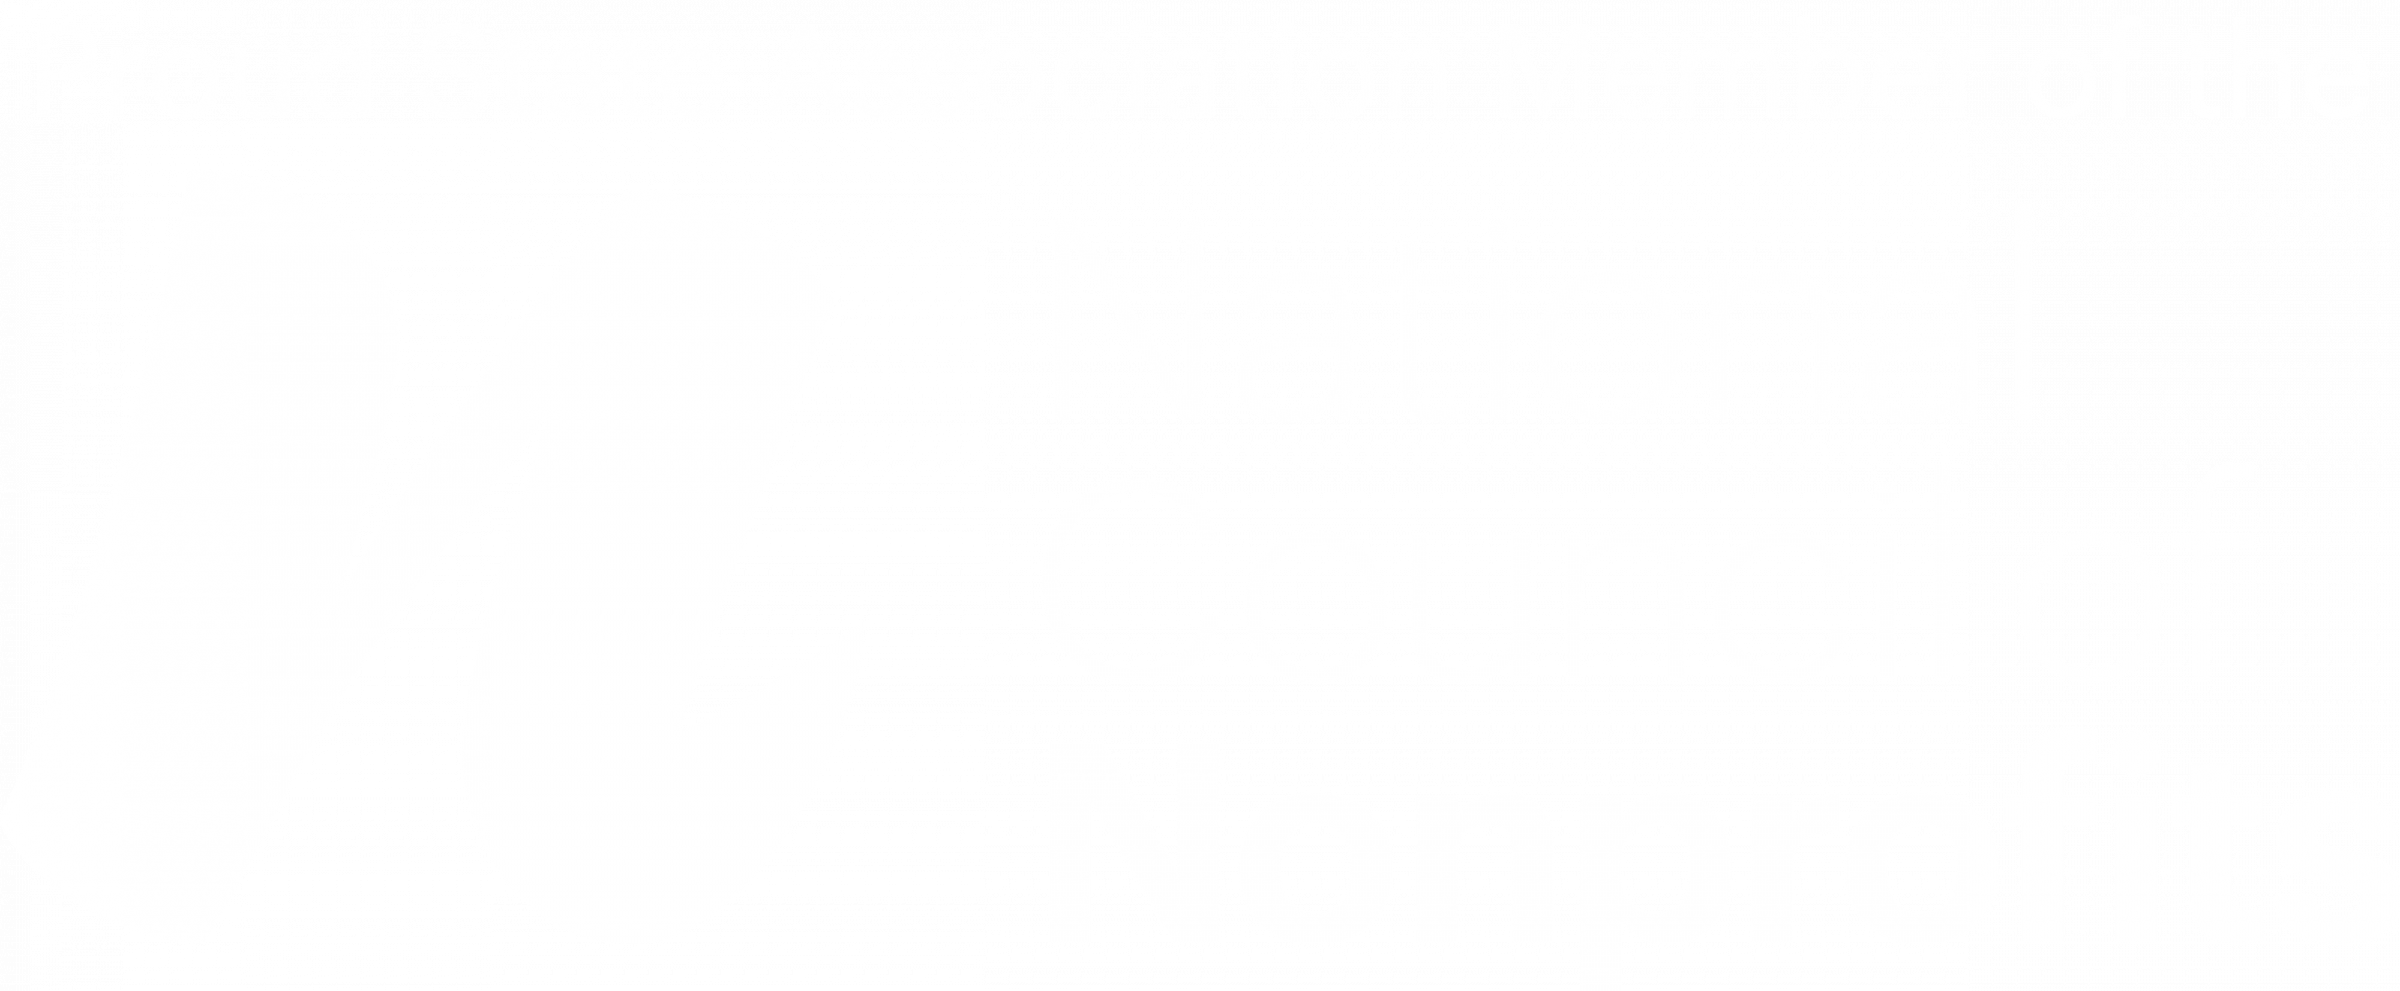 Proud State Association Member of the National Council of Nonprofits